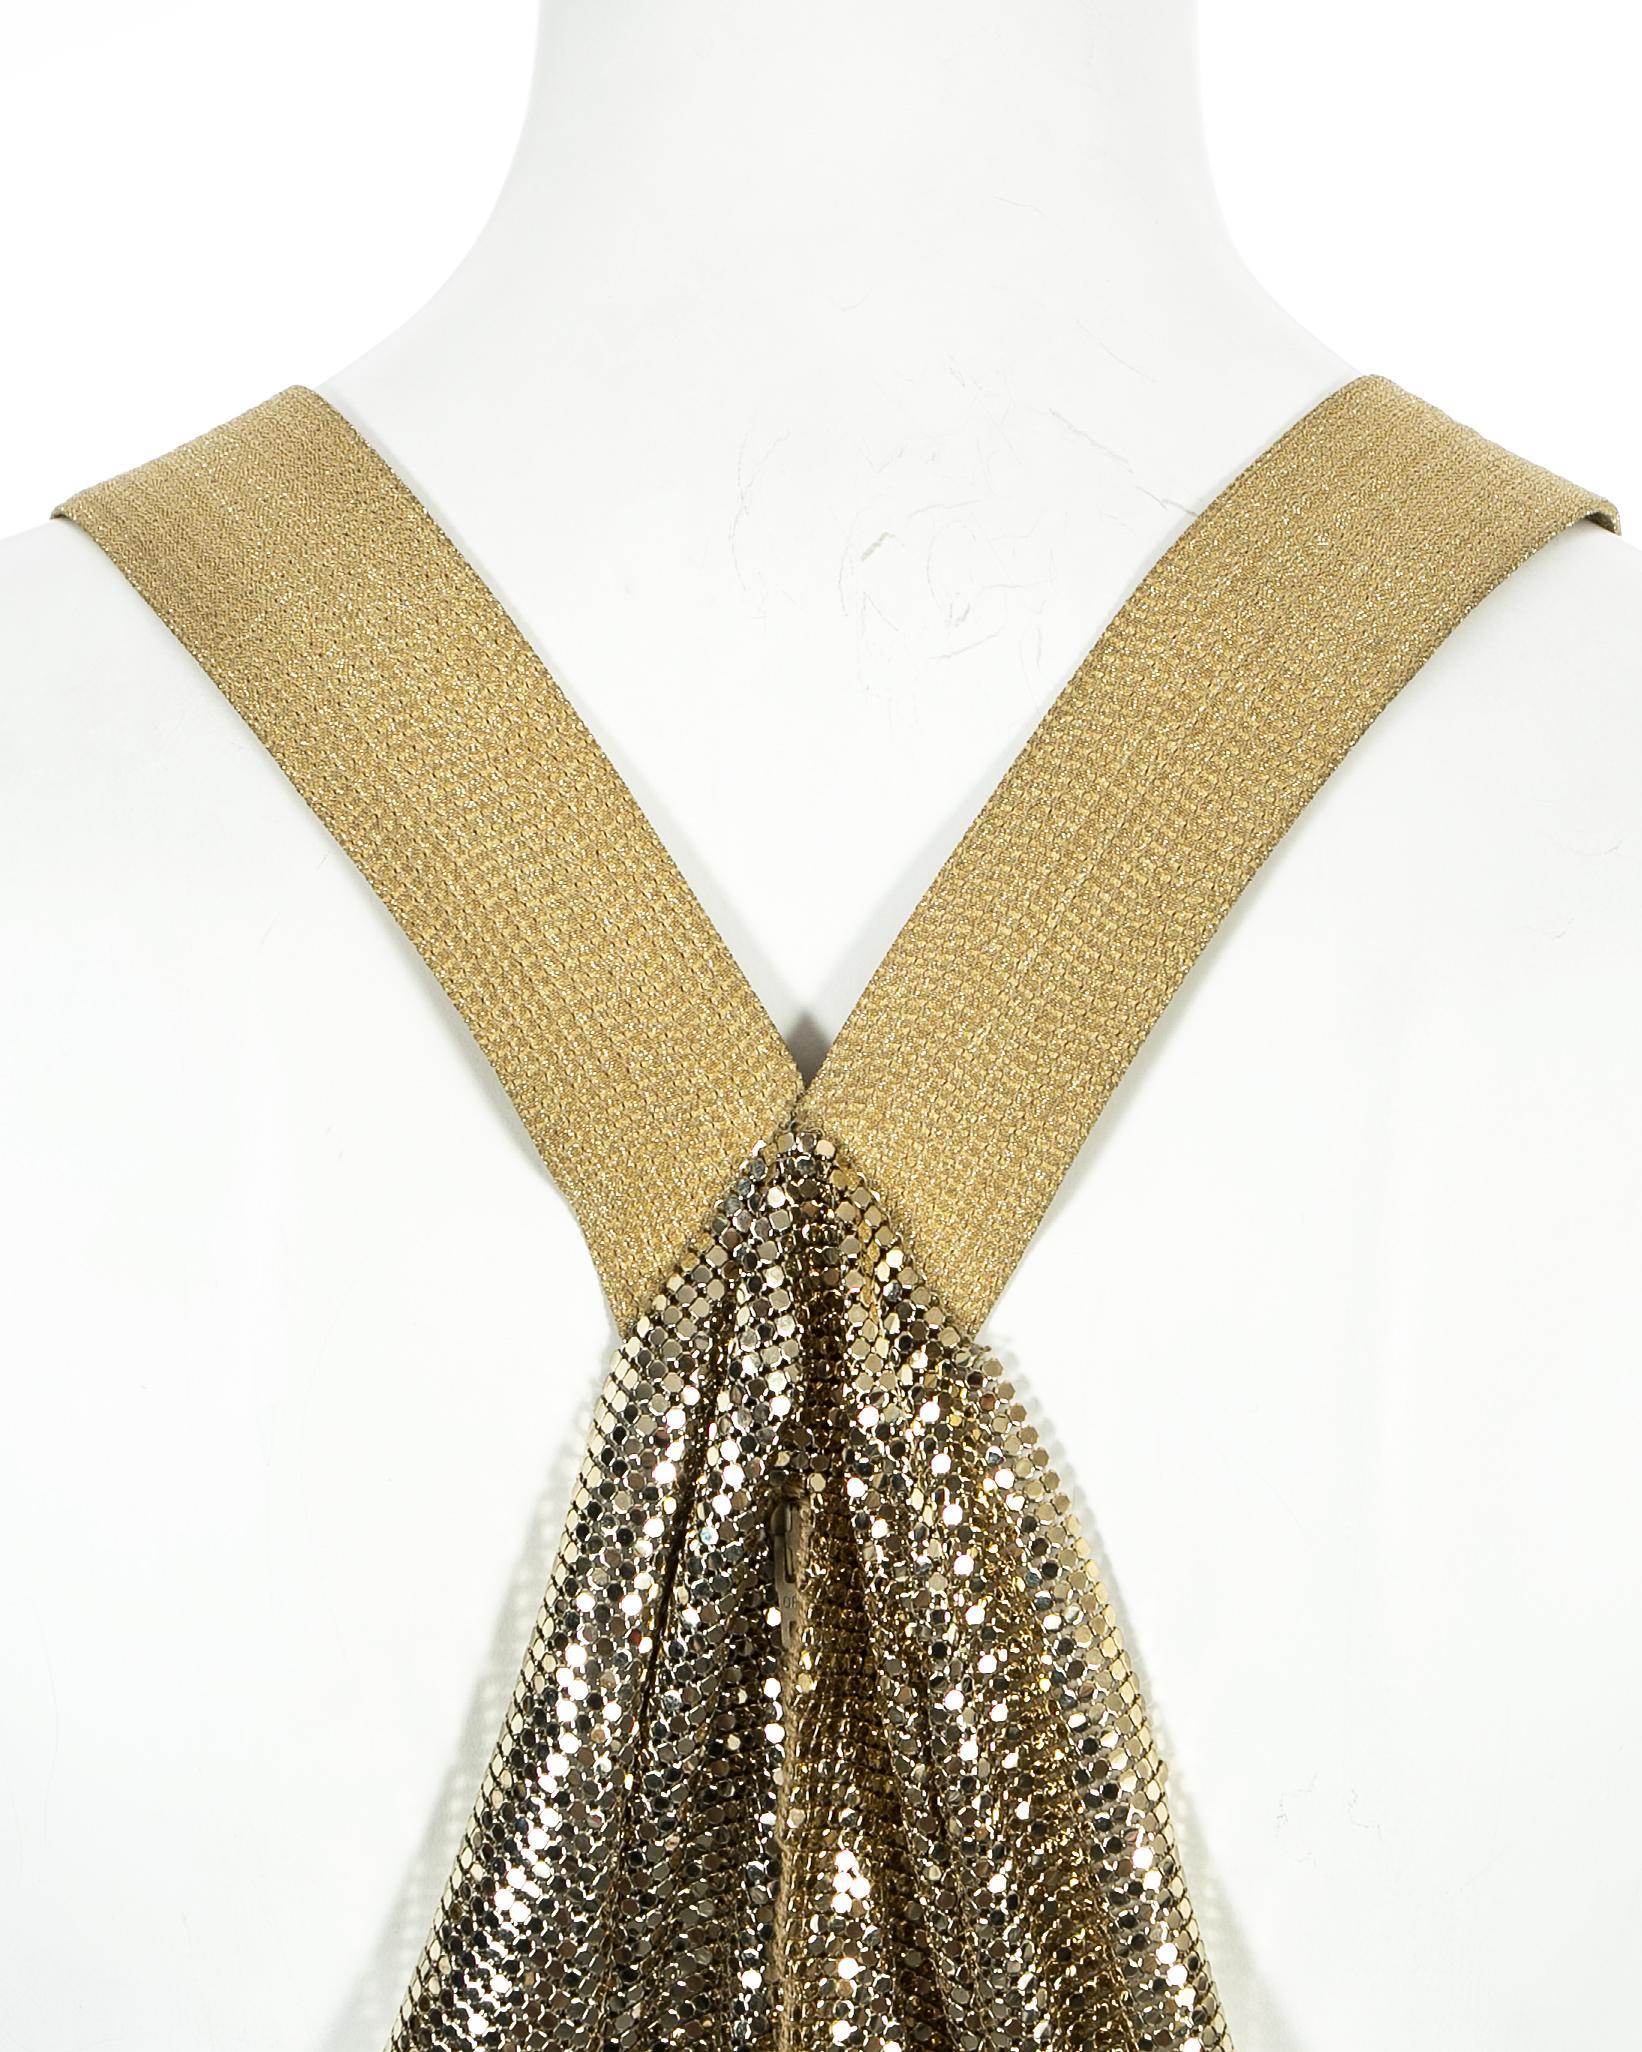 Gianni Versace gold metal mesh chainmail evening dress, fw 1994 2